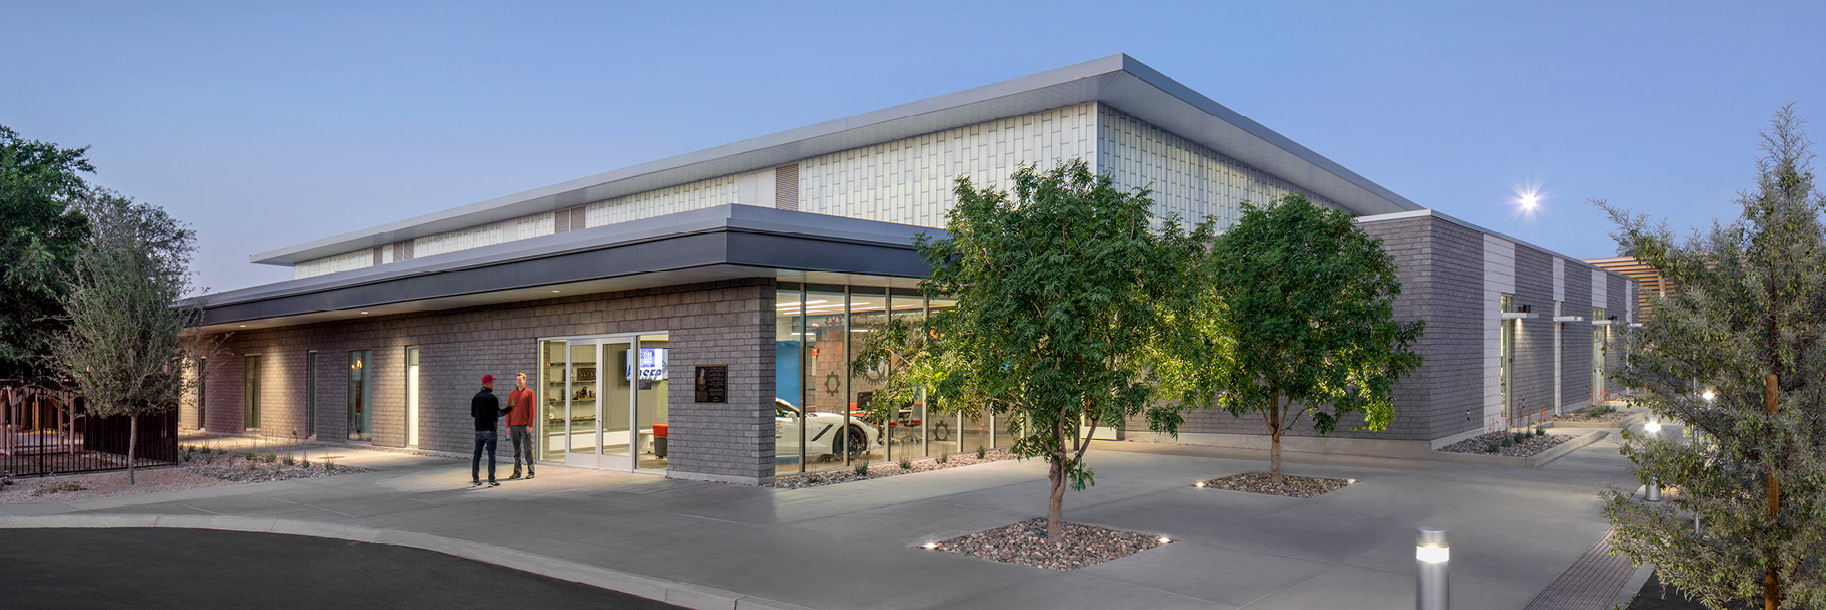 Exterior of Glendale Community College Automotive Technology building in Arizona featuring Kalwall facades on multiple sides